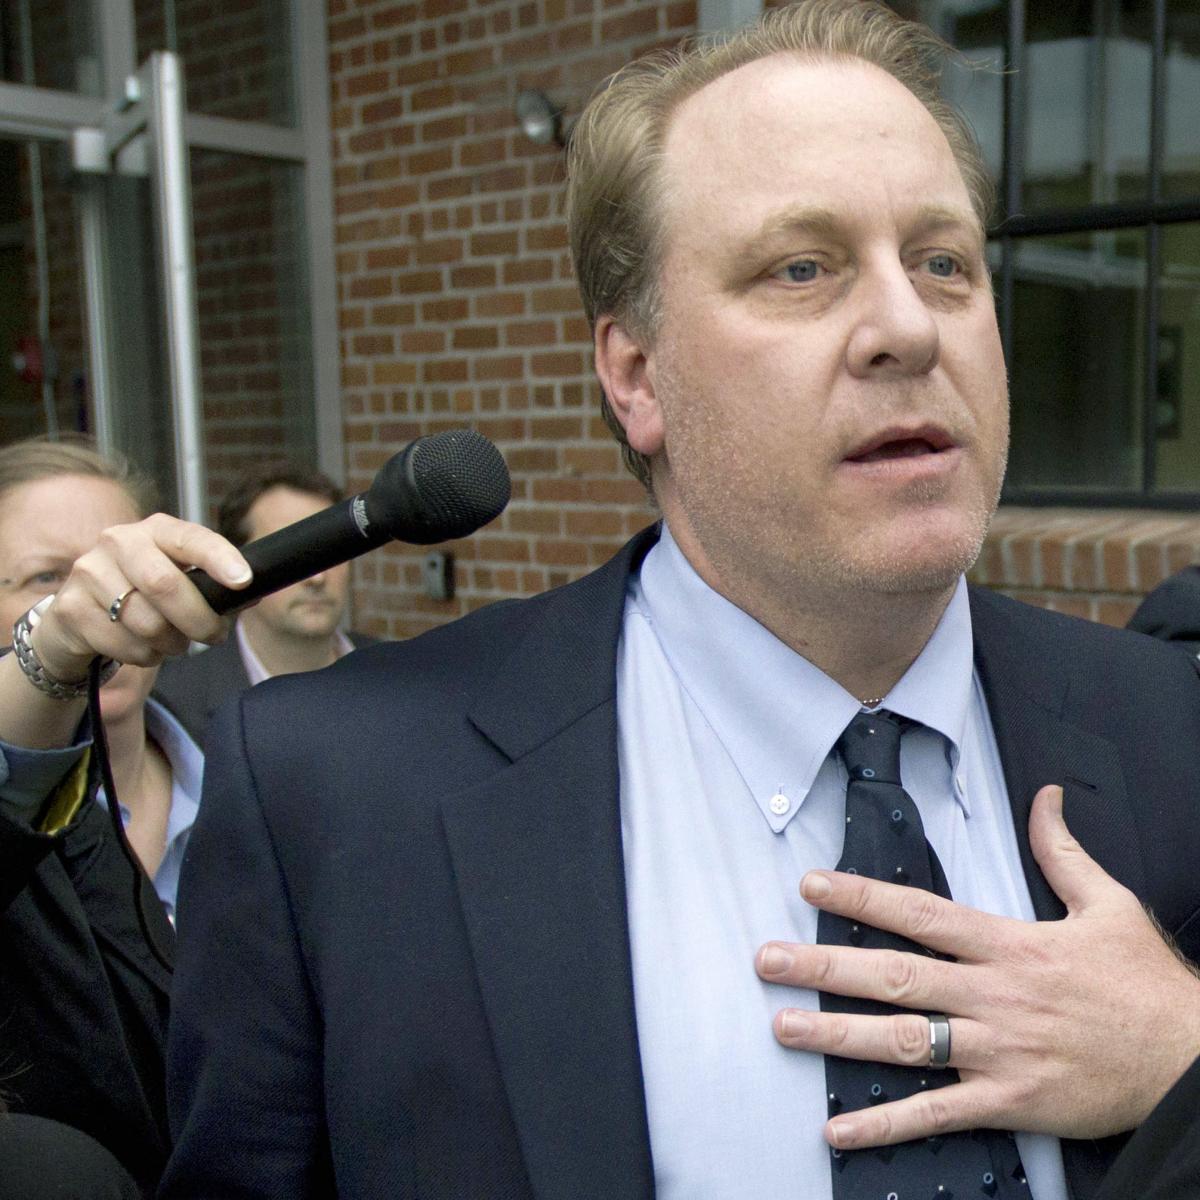 Fact Check: Are Curt Schilling's controversial comments on COVID vaccines  correct? Former pitcher reignites controversy, calling them 'untested